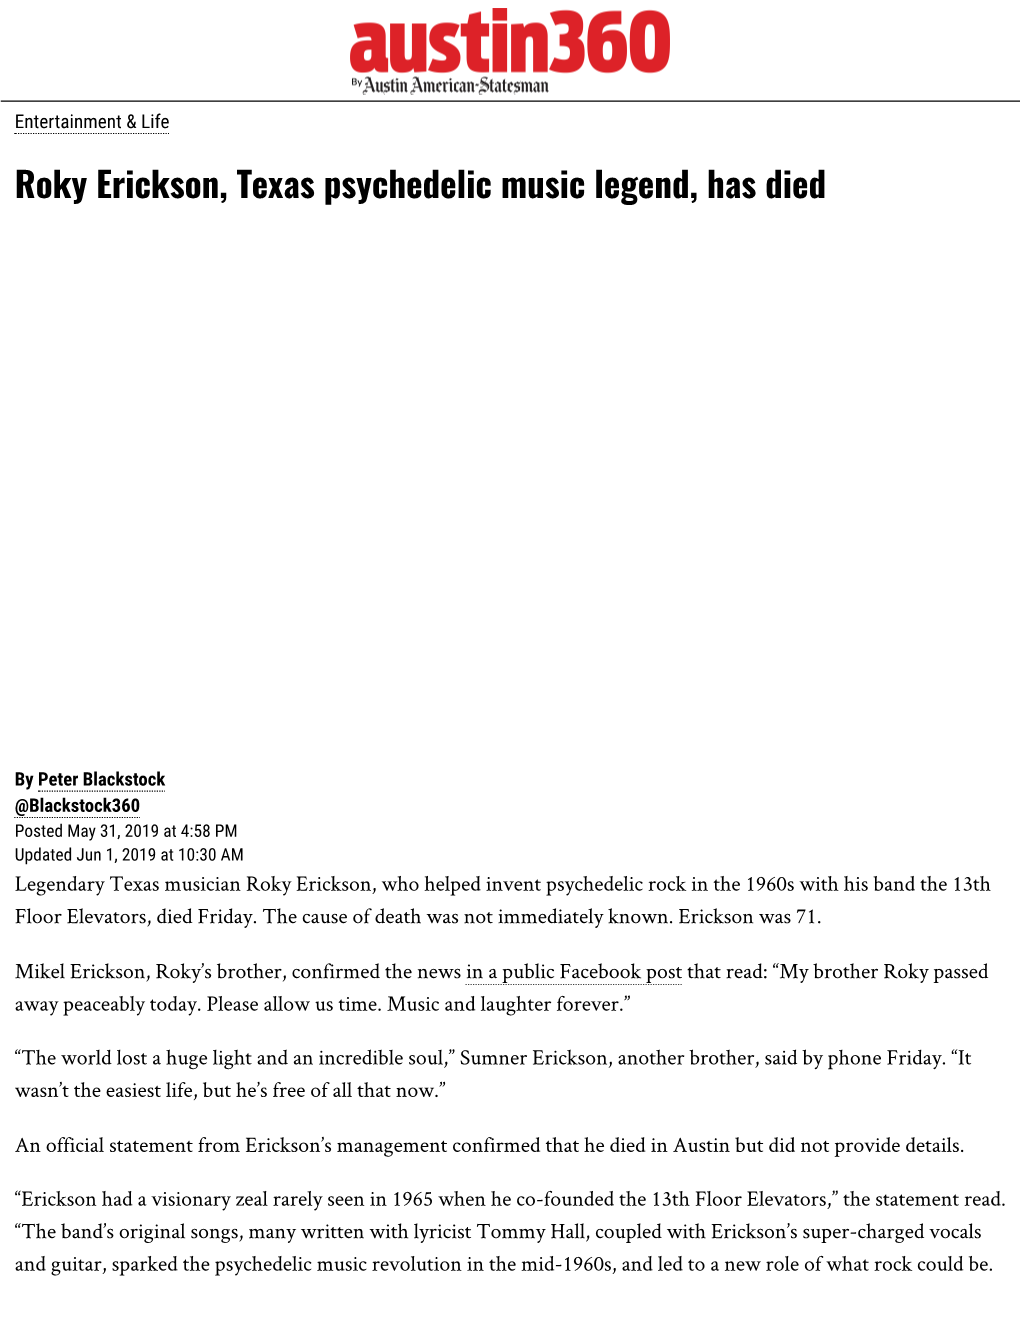 Roky Erickson, Texas Psychedelic Music Legend, Has Died